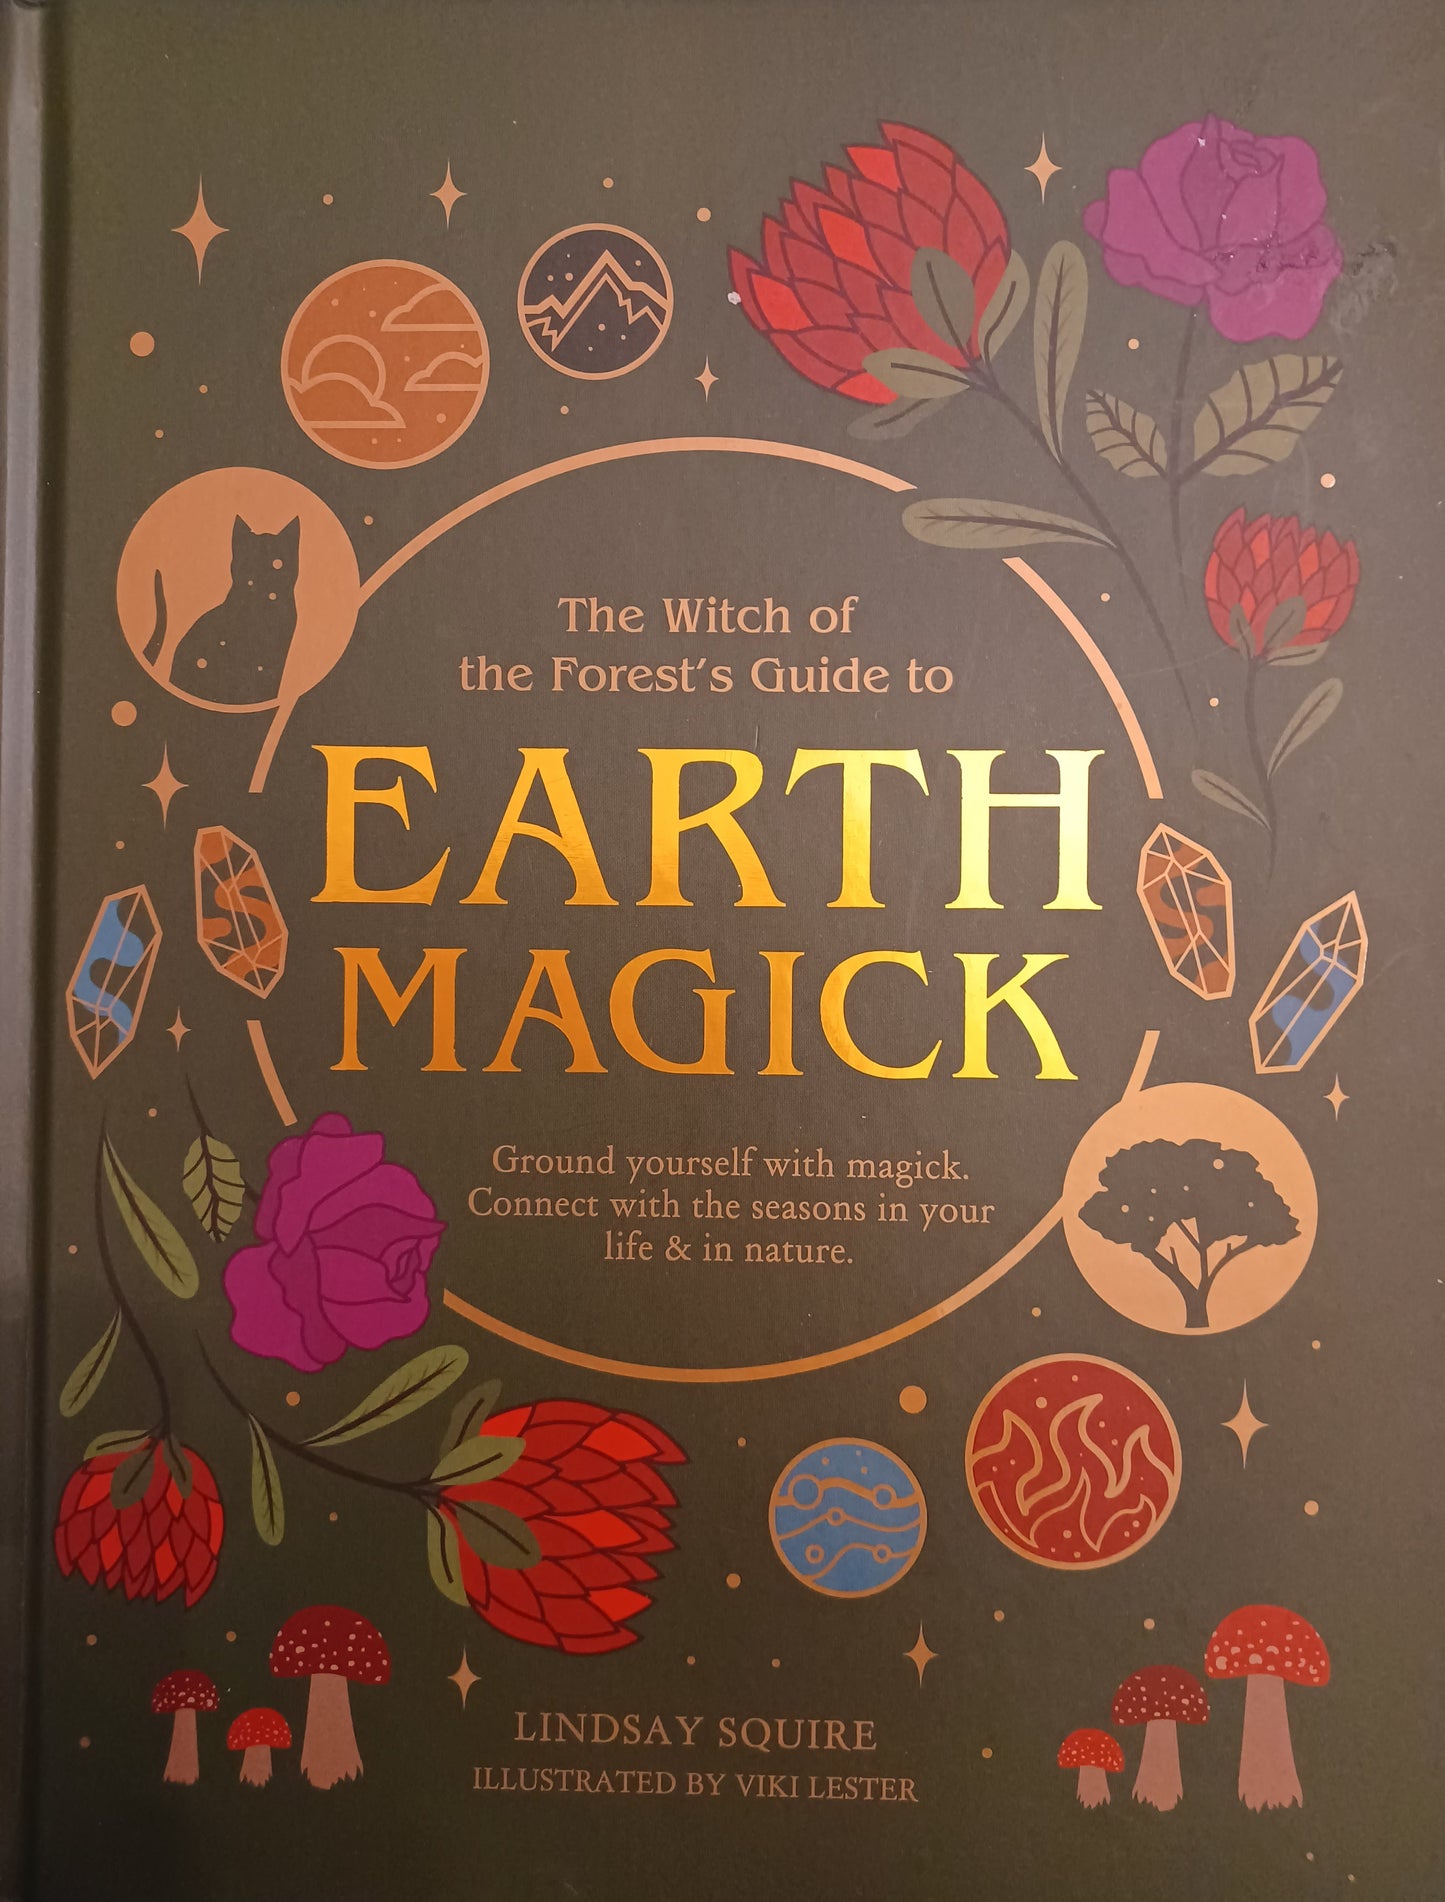 The Witch of the Forest's Guide to Earth Magick